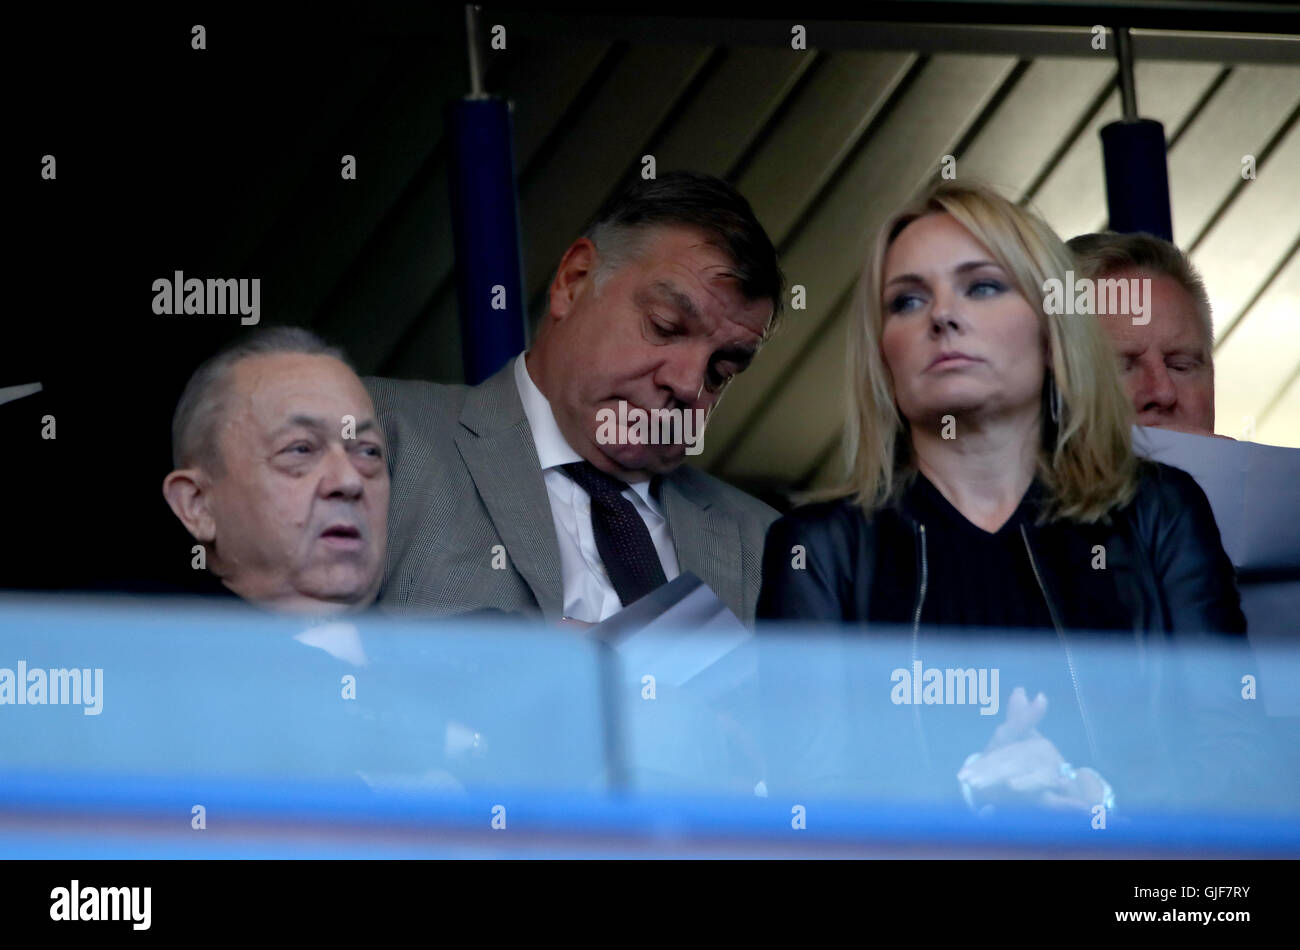 England manager Sam Allardyce (rear) in the stands behind West Ham United joint-chairman David Sullivan (left) and his partner Eve Vorley during the Premier League match at Stamford Bridge, London. Stock Photo